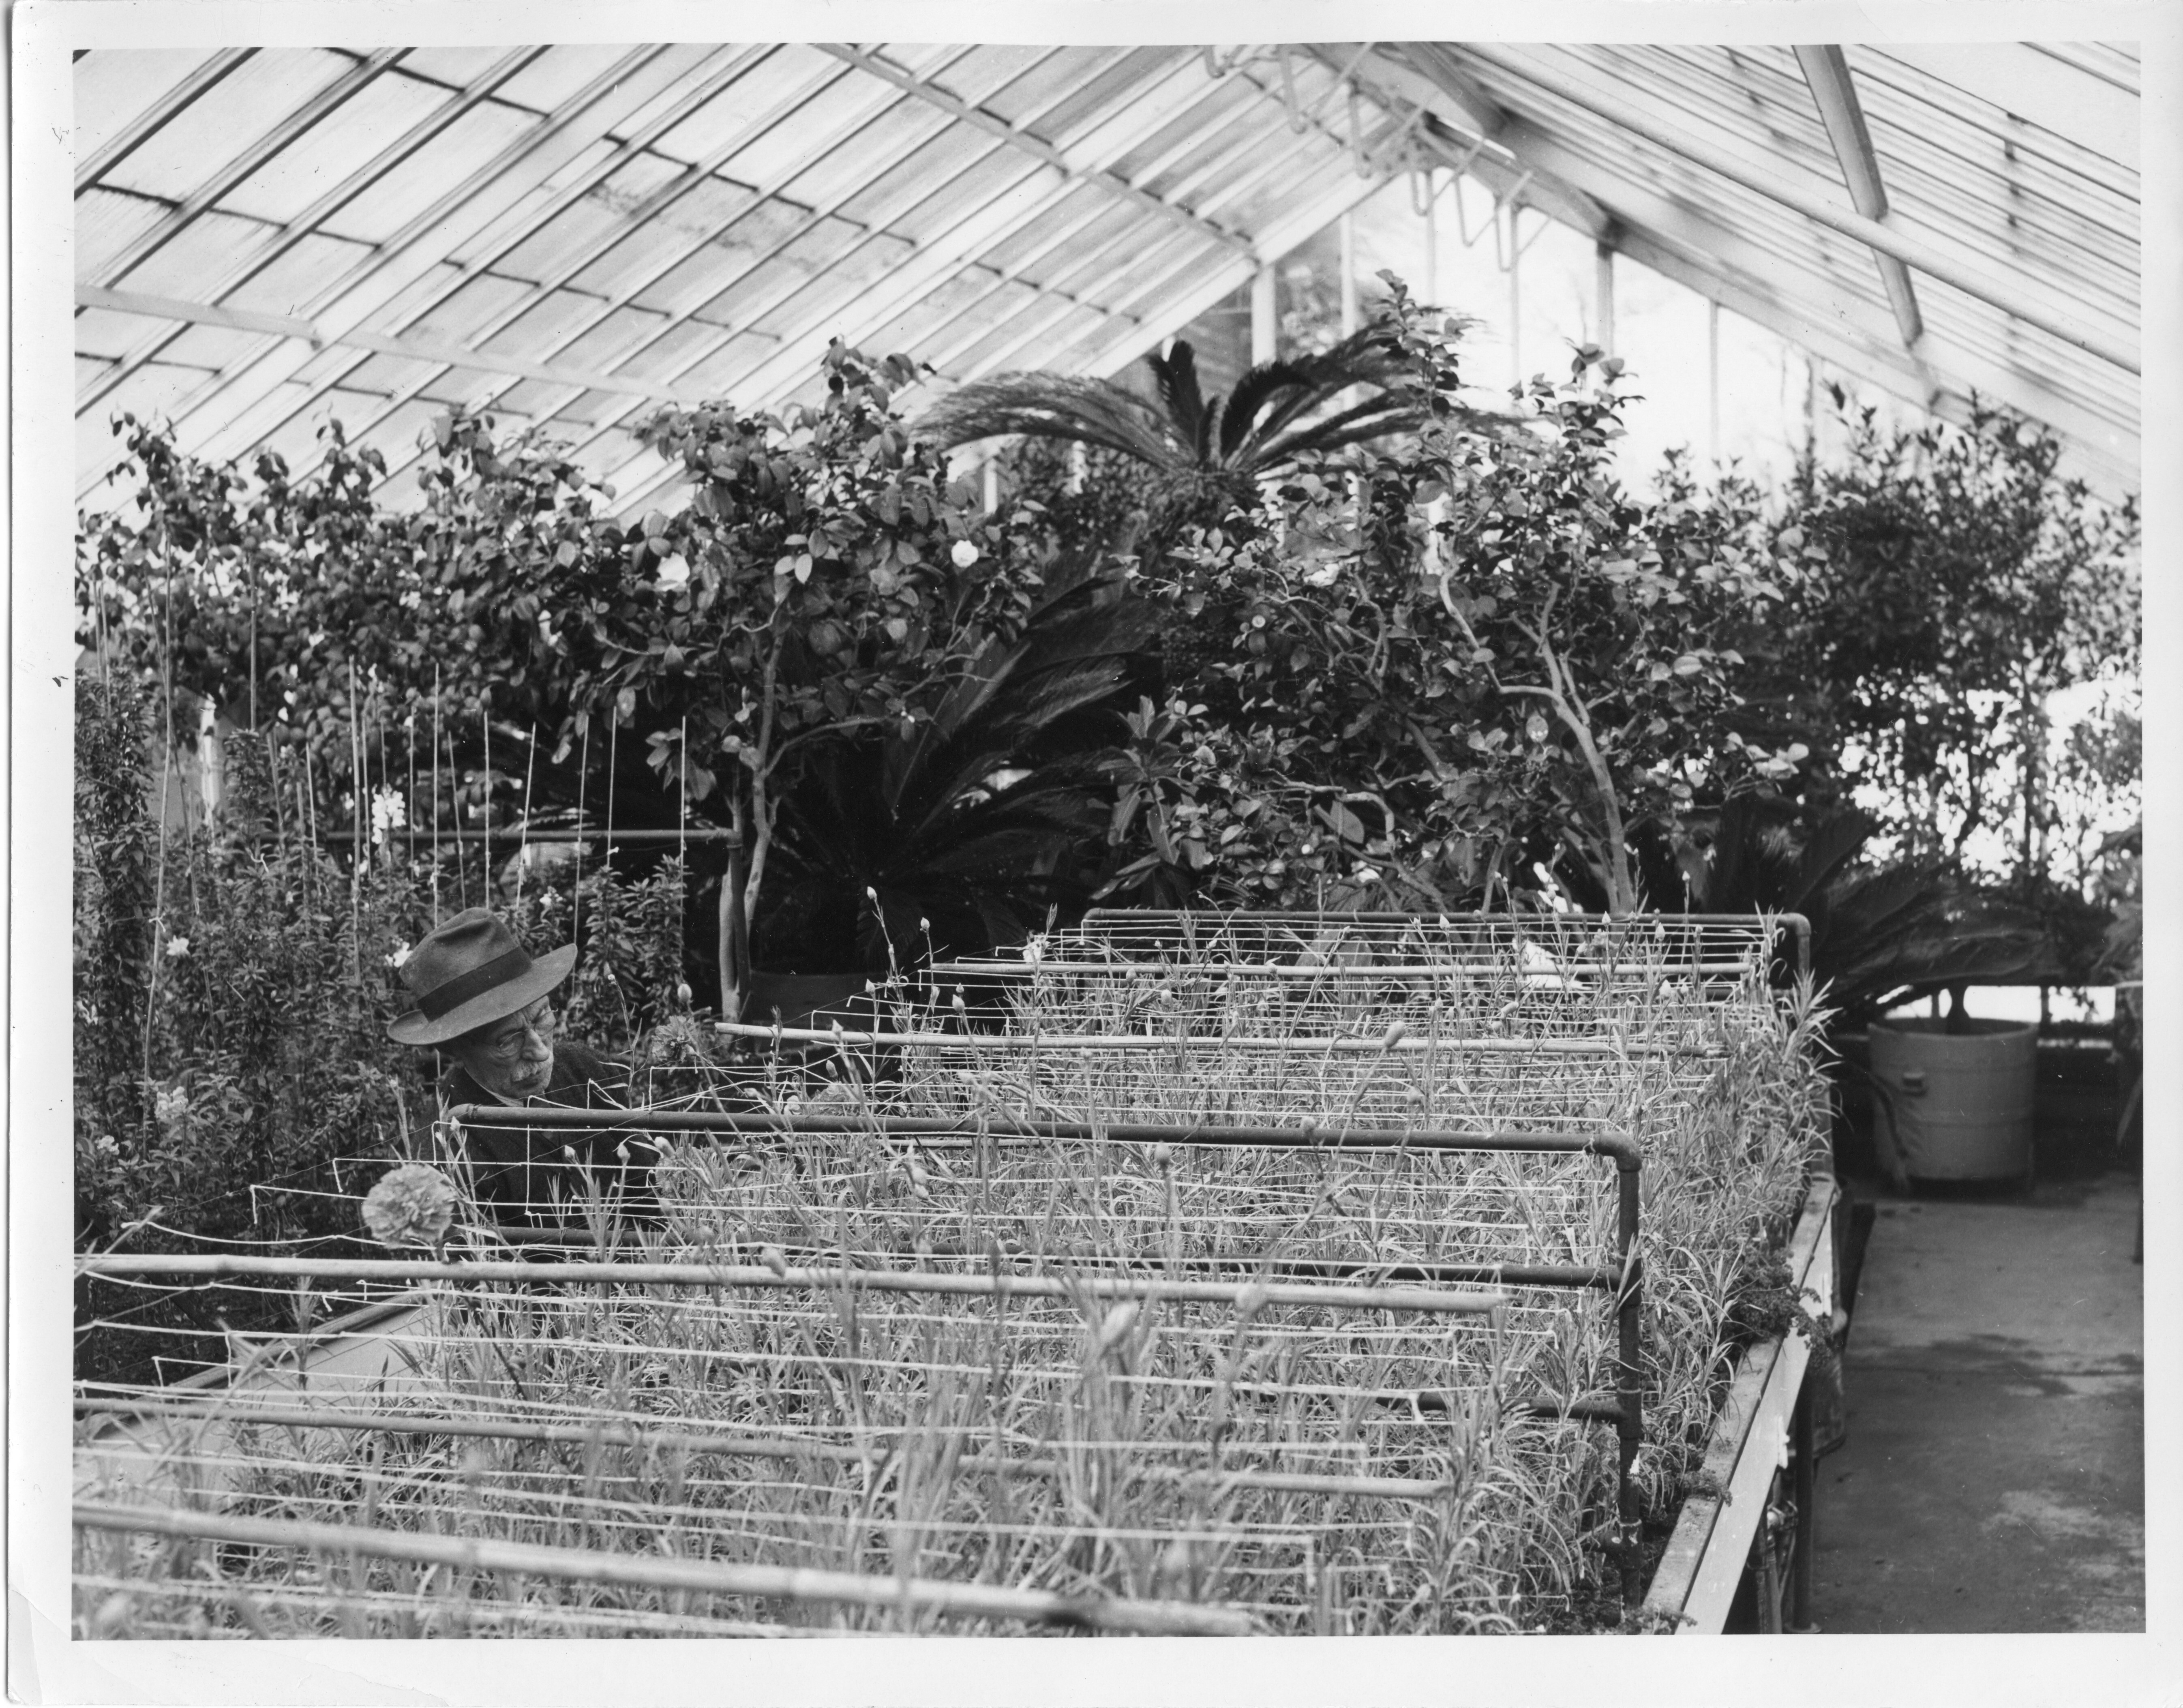 A man examines plants inside a greenhouse